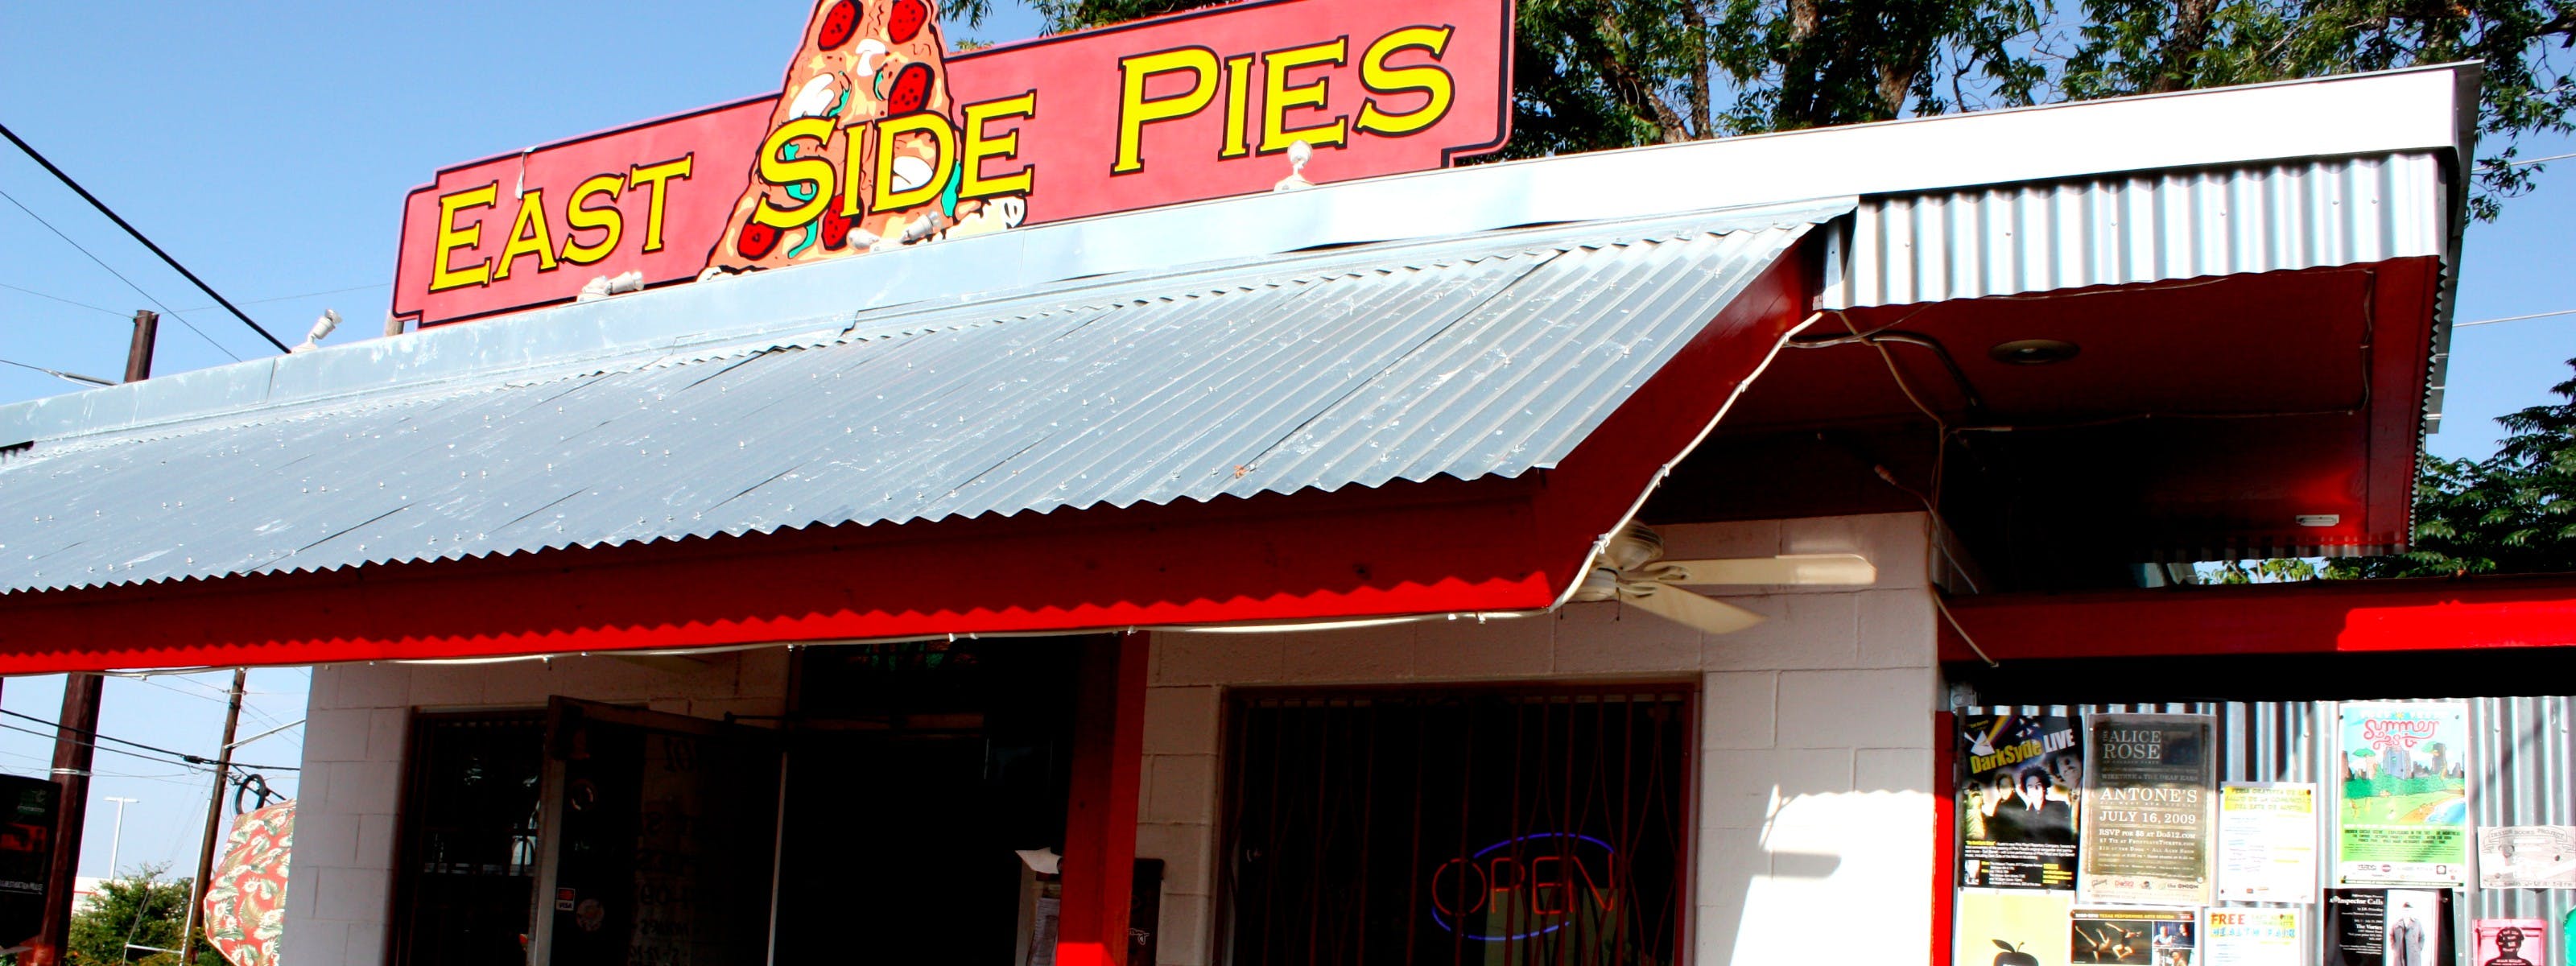 East Side Pies Review - East Austin - Austin - The Infatuation